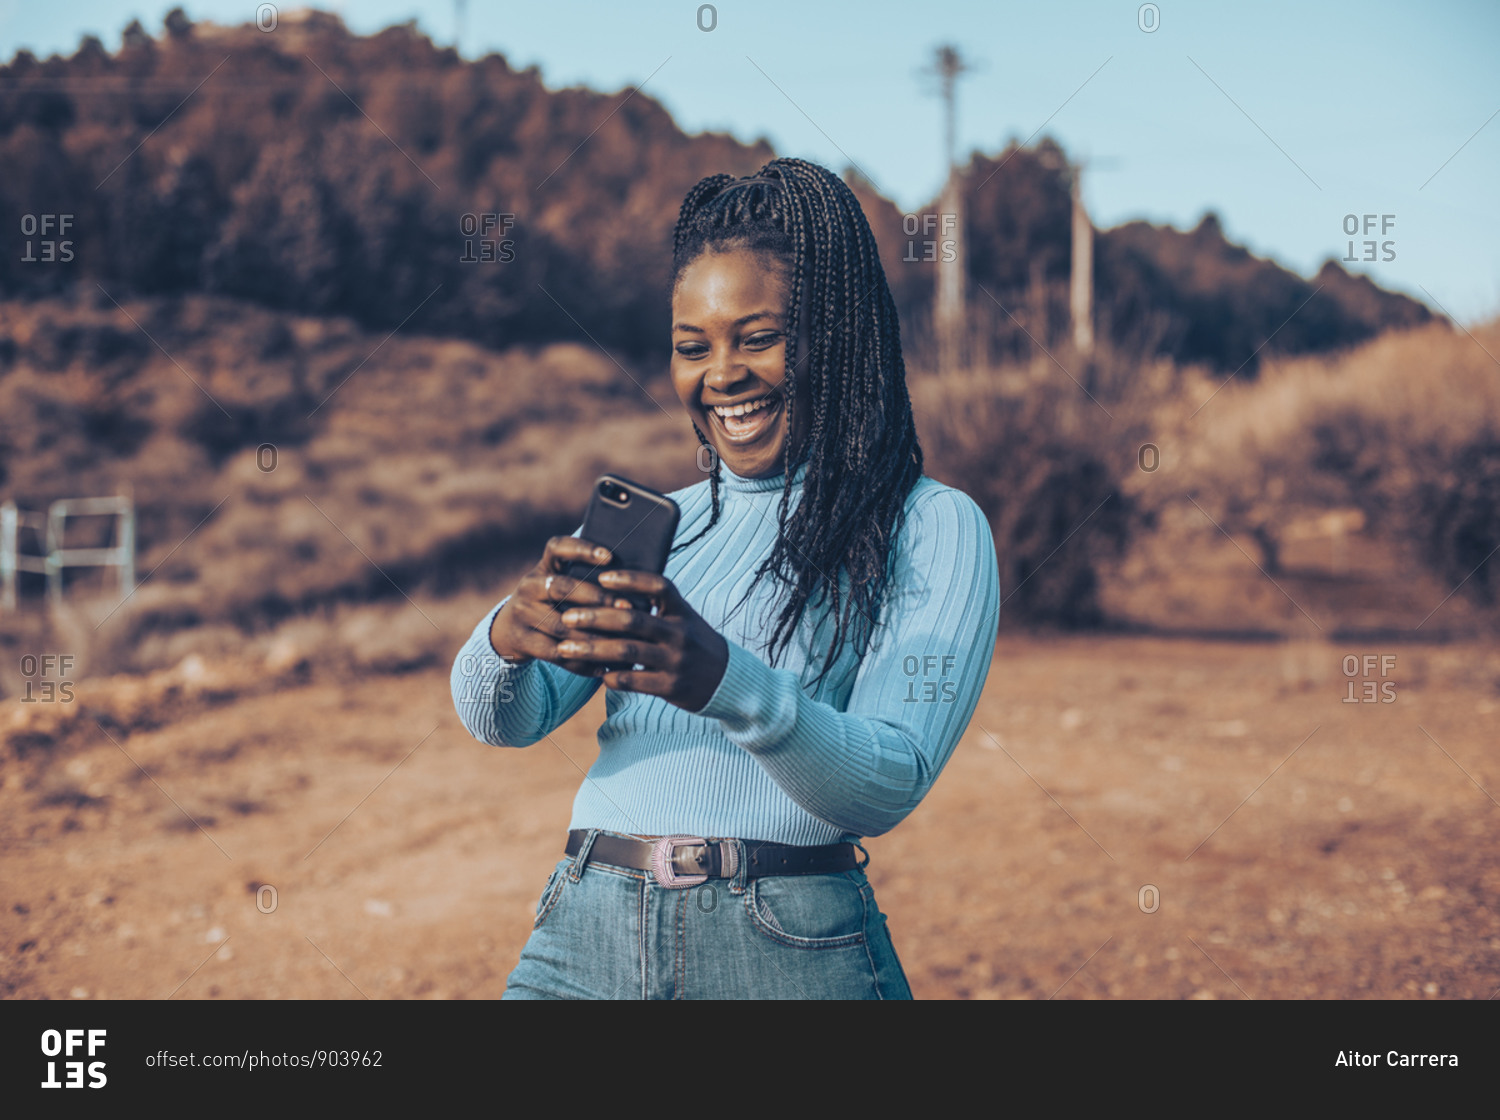 Young woman with braids smiling using cell phone in a rural setting